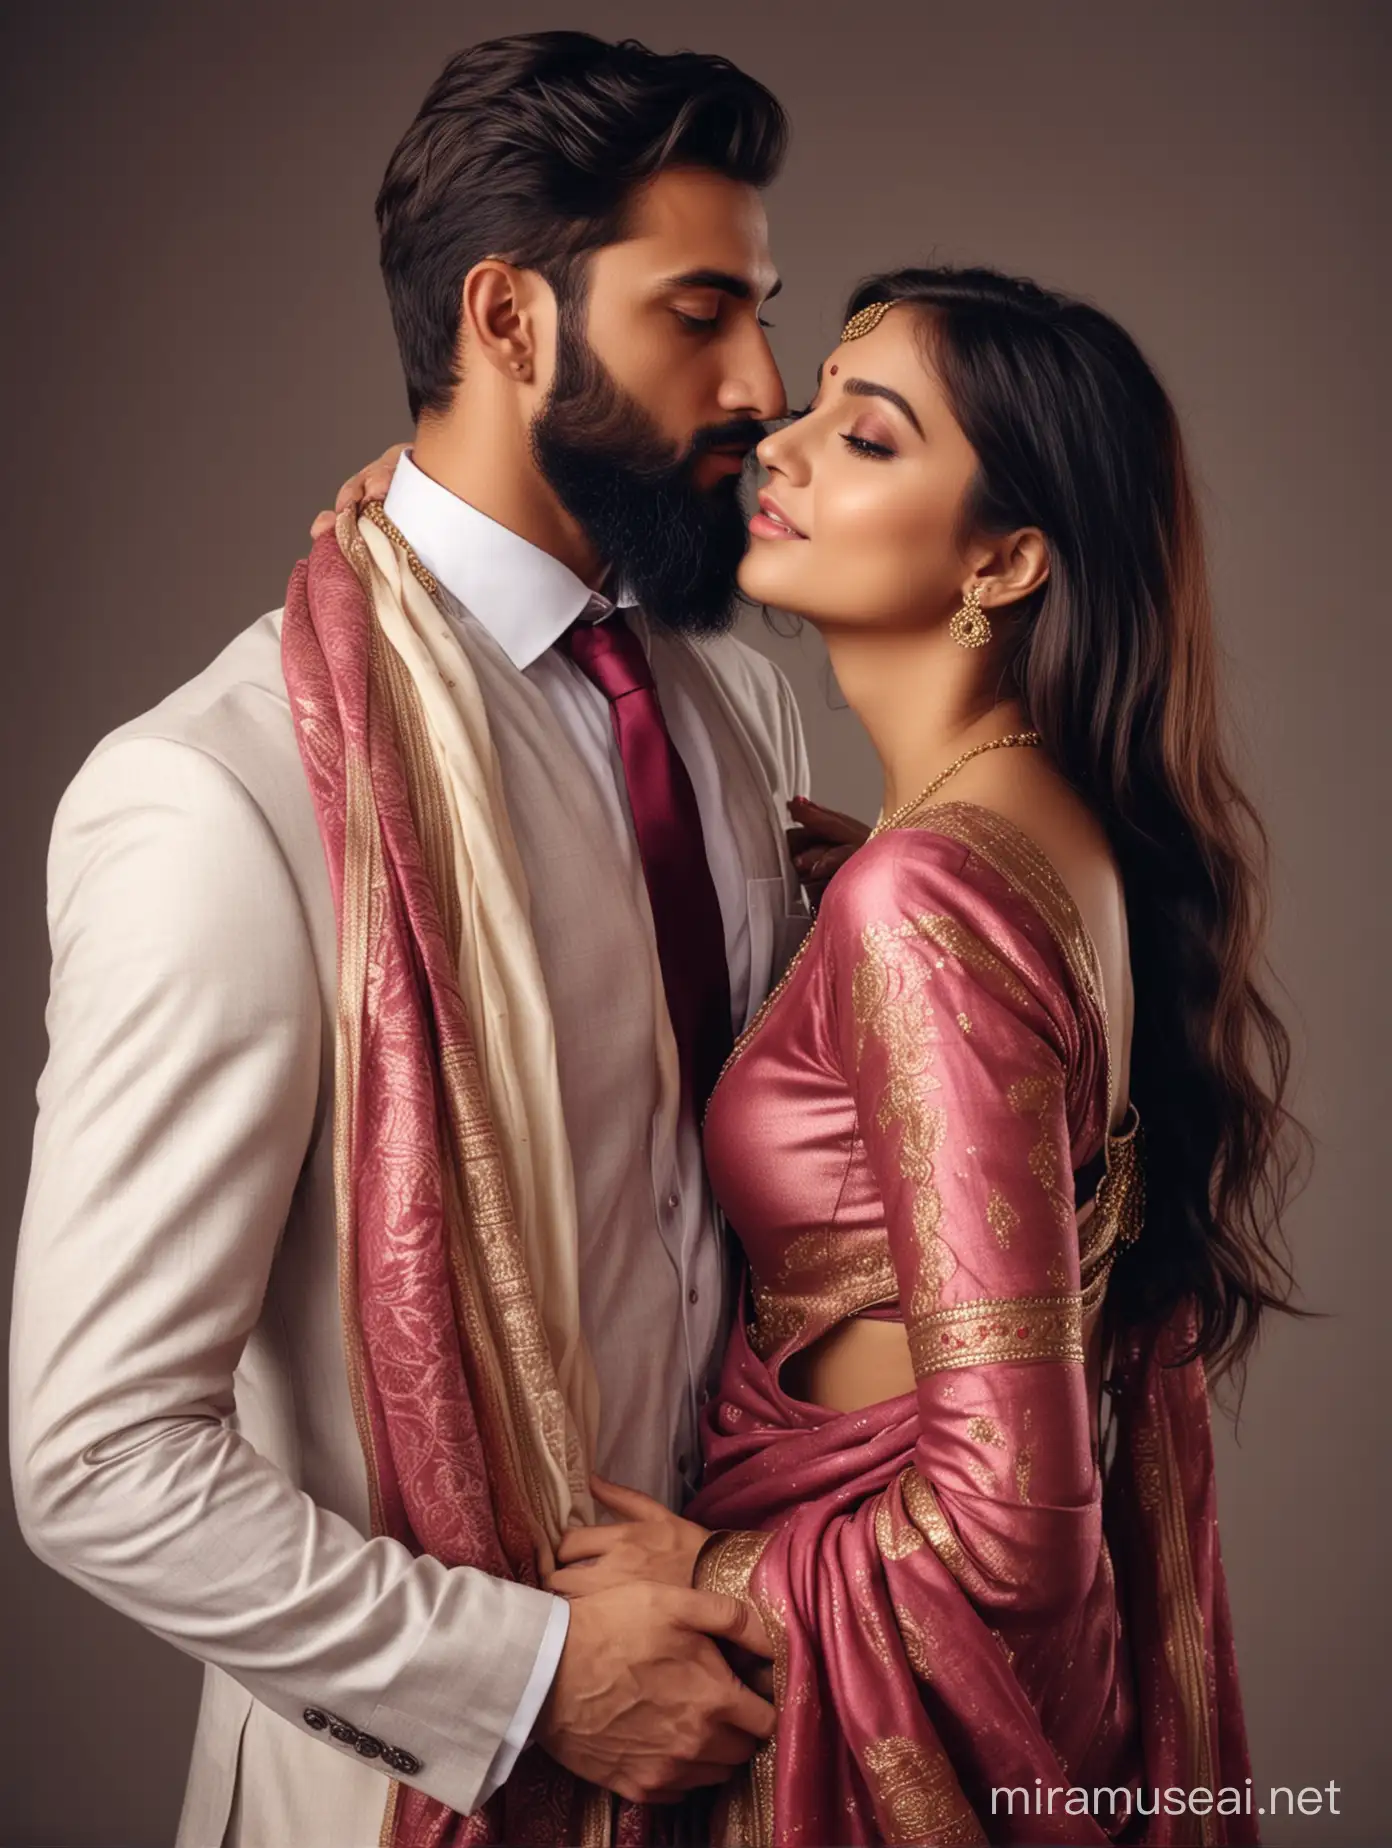 full portrait photo of most beautiful european couple as most beautiful indian couple, most beautiful girl in saree, full makeup, holding man from back side, . hands around man neck from back of man, with emotional attachment and ecstasy, man with stylish beard and in formals and tie, photo realistic, 4k.